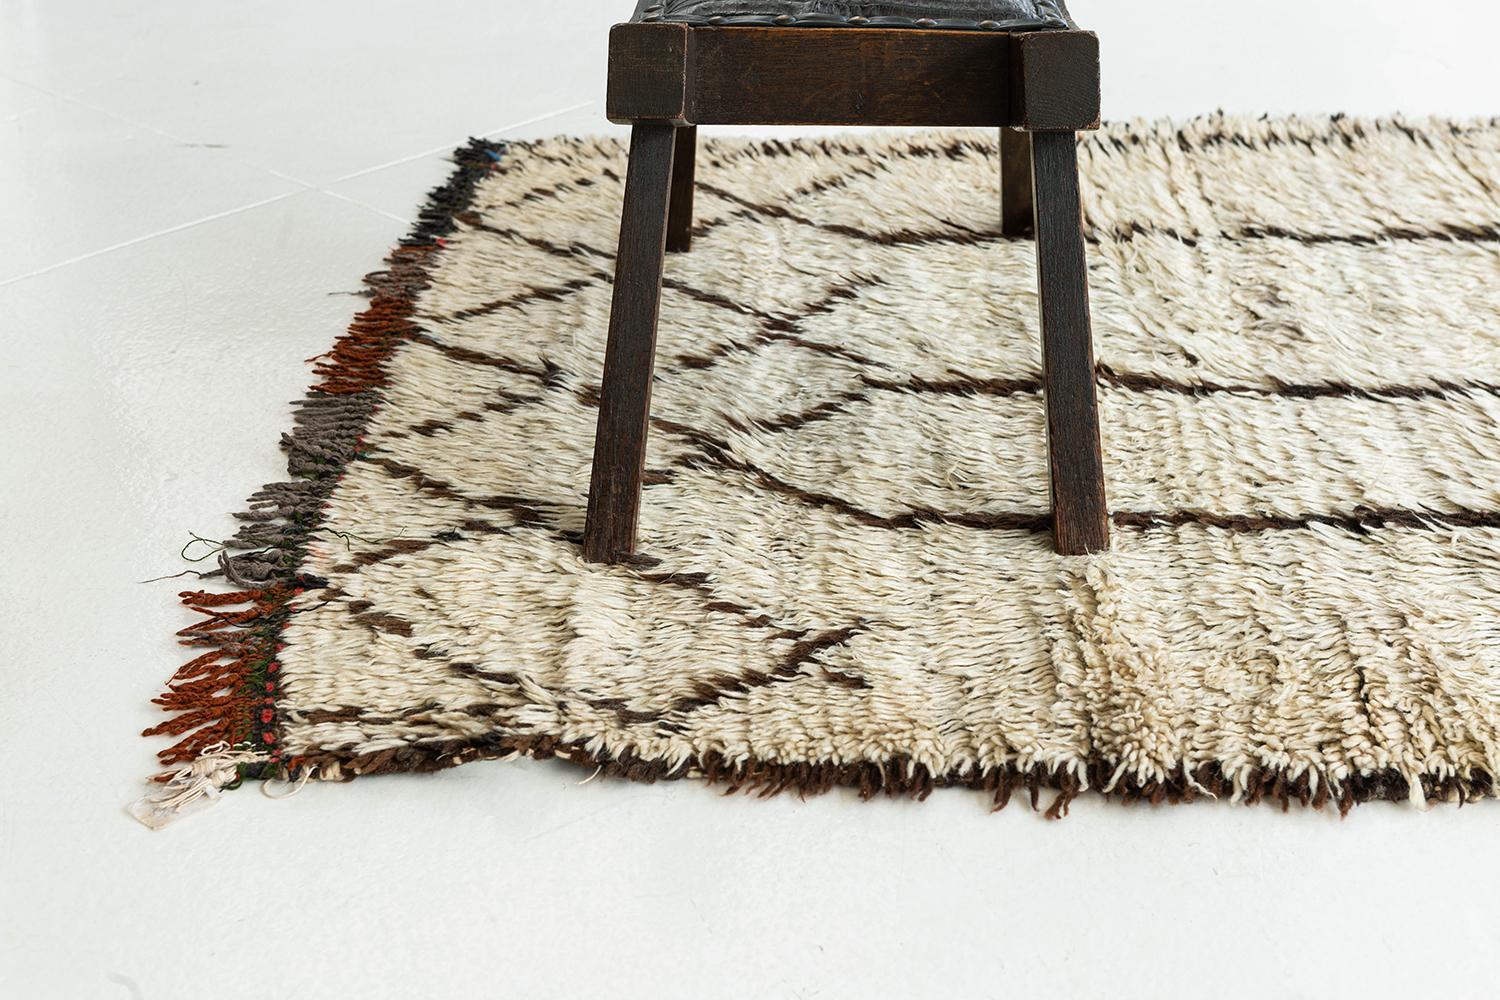 Deep ivory pile with a dark brown linear motif of diamonds and vertical divisions. Subdued color in the fringe. A unique vintage tribal rug from the Atlas Mountains of Morocco.